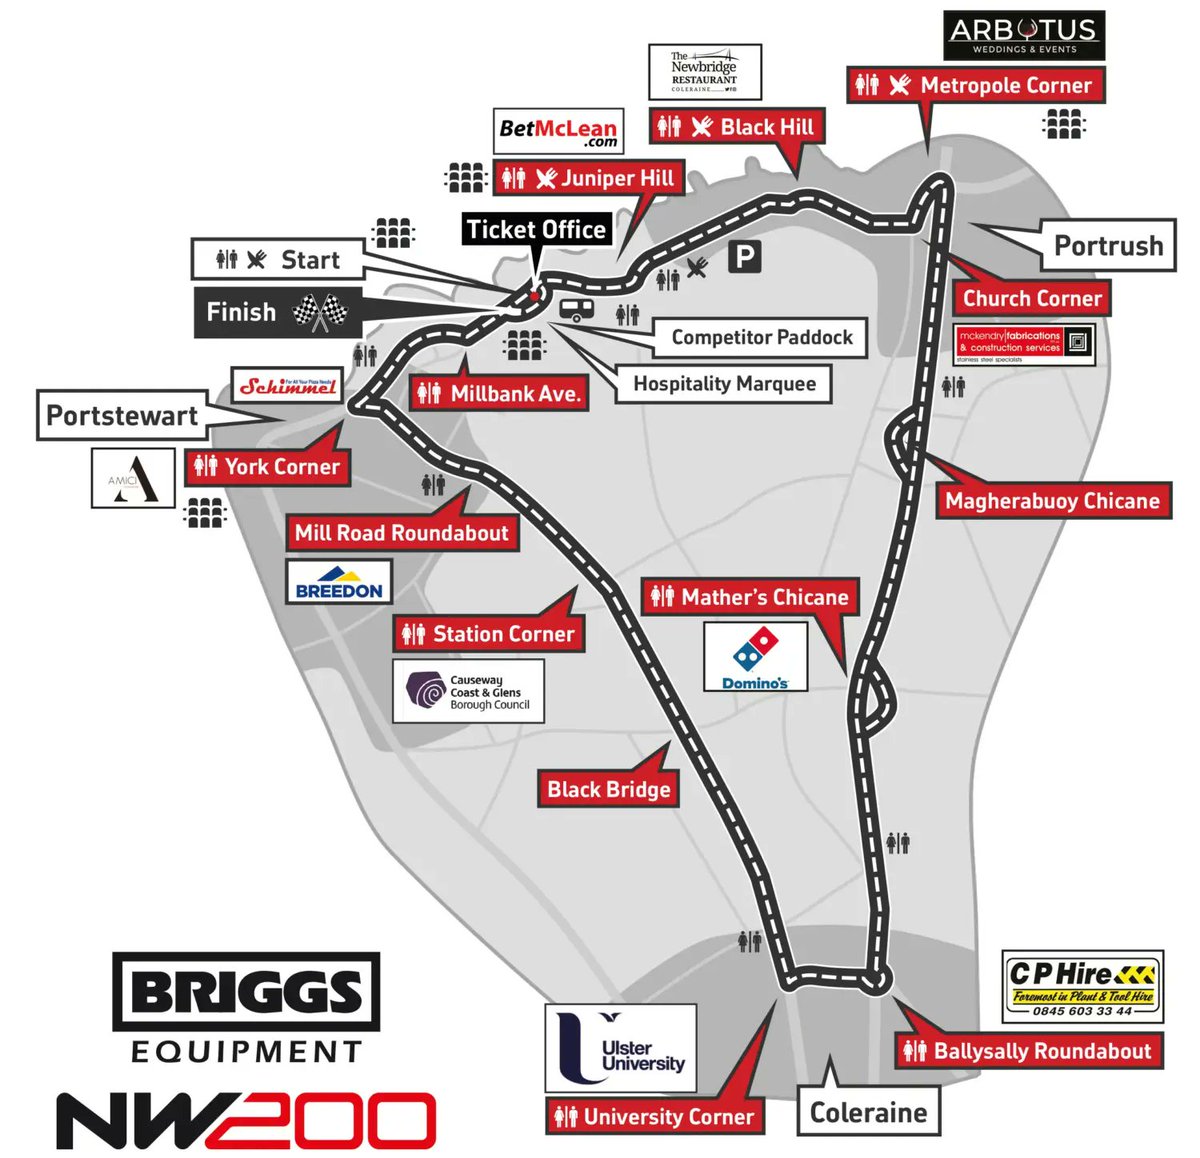 Best of luck to all the competitors, officials and marshals for the first practice day of the @northwest200. Fast & safe. 🏁🏍 Check out your vantage points! 👇 #NorthWest200 #NW200 #CausewayGlensEvents #VisitCauseway